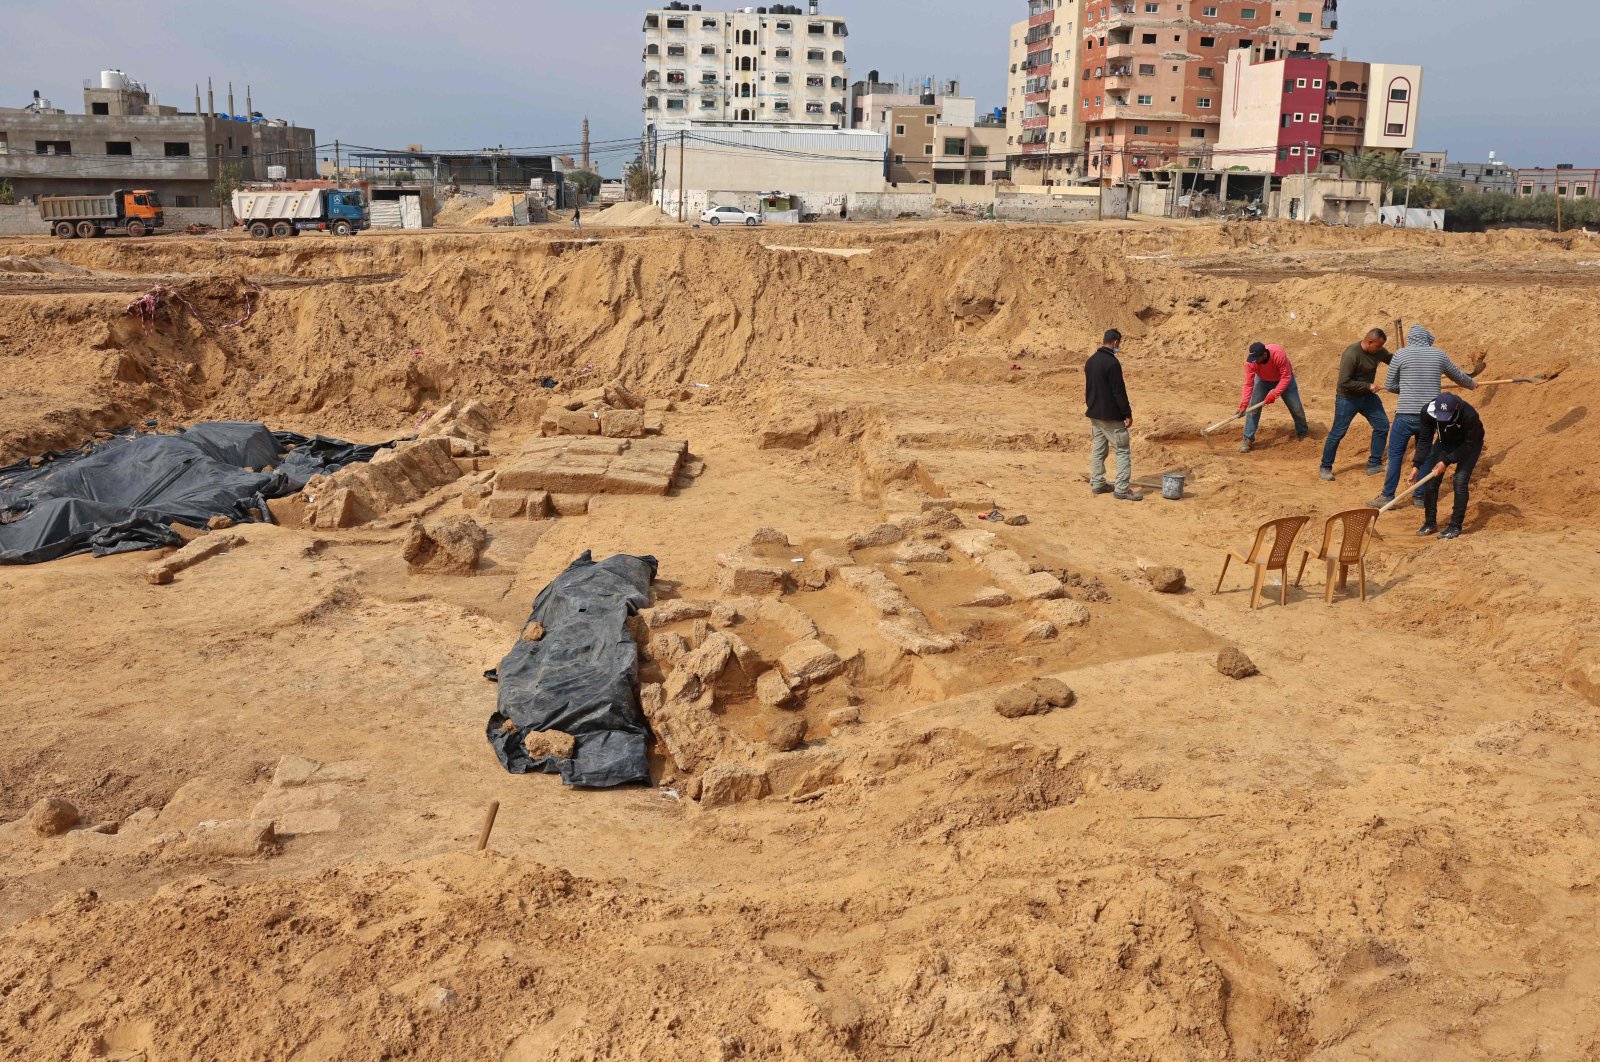 Palestinian workers excavate a newly discovered Roman cemetery containing ornately decorated graves, in Beit Lahia in the northern Gaza Strip, on Feb. 20, 2022. (AFP)